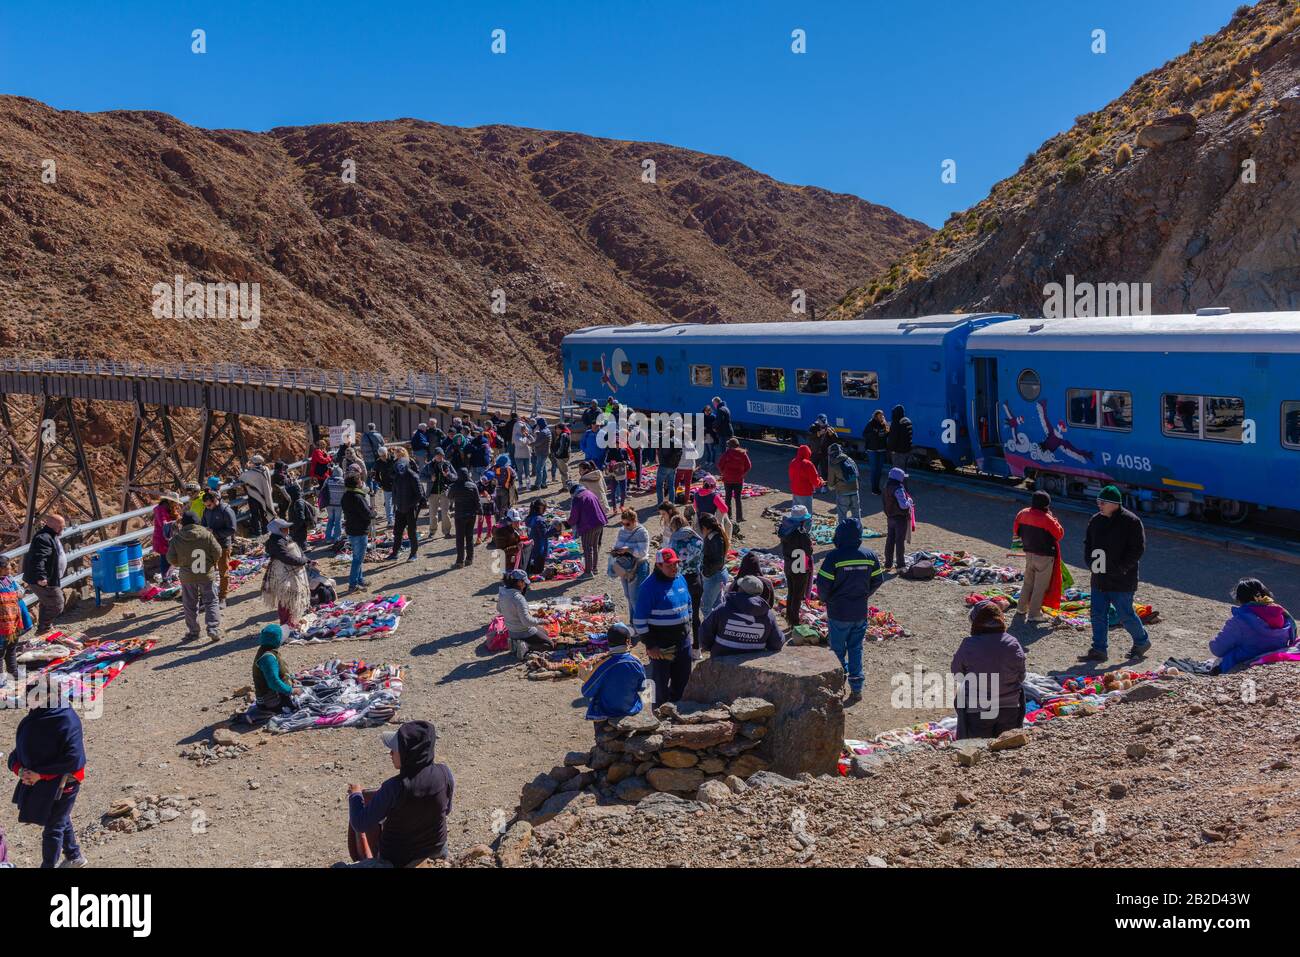 Market at the "Viaducto La Polvorilla", 4200m ALS, final station of the "Tren a las Nubes", Province of Salta, Andes, NW Argentina, Latin America Stock Photo